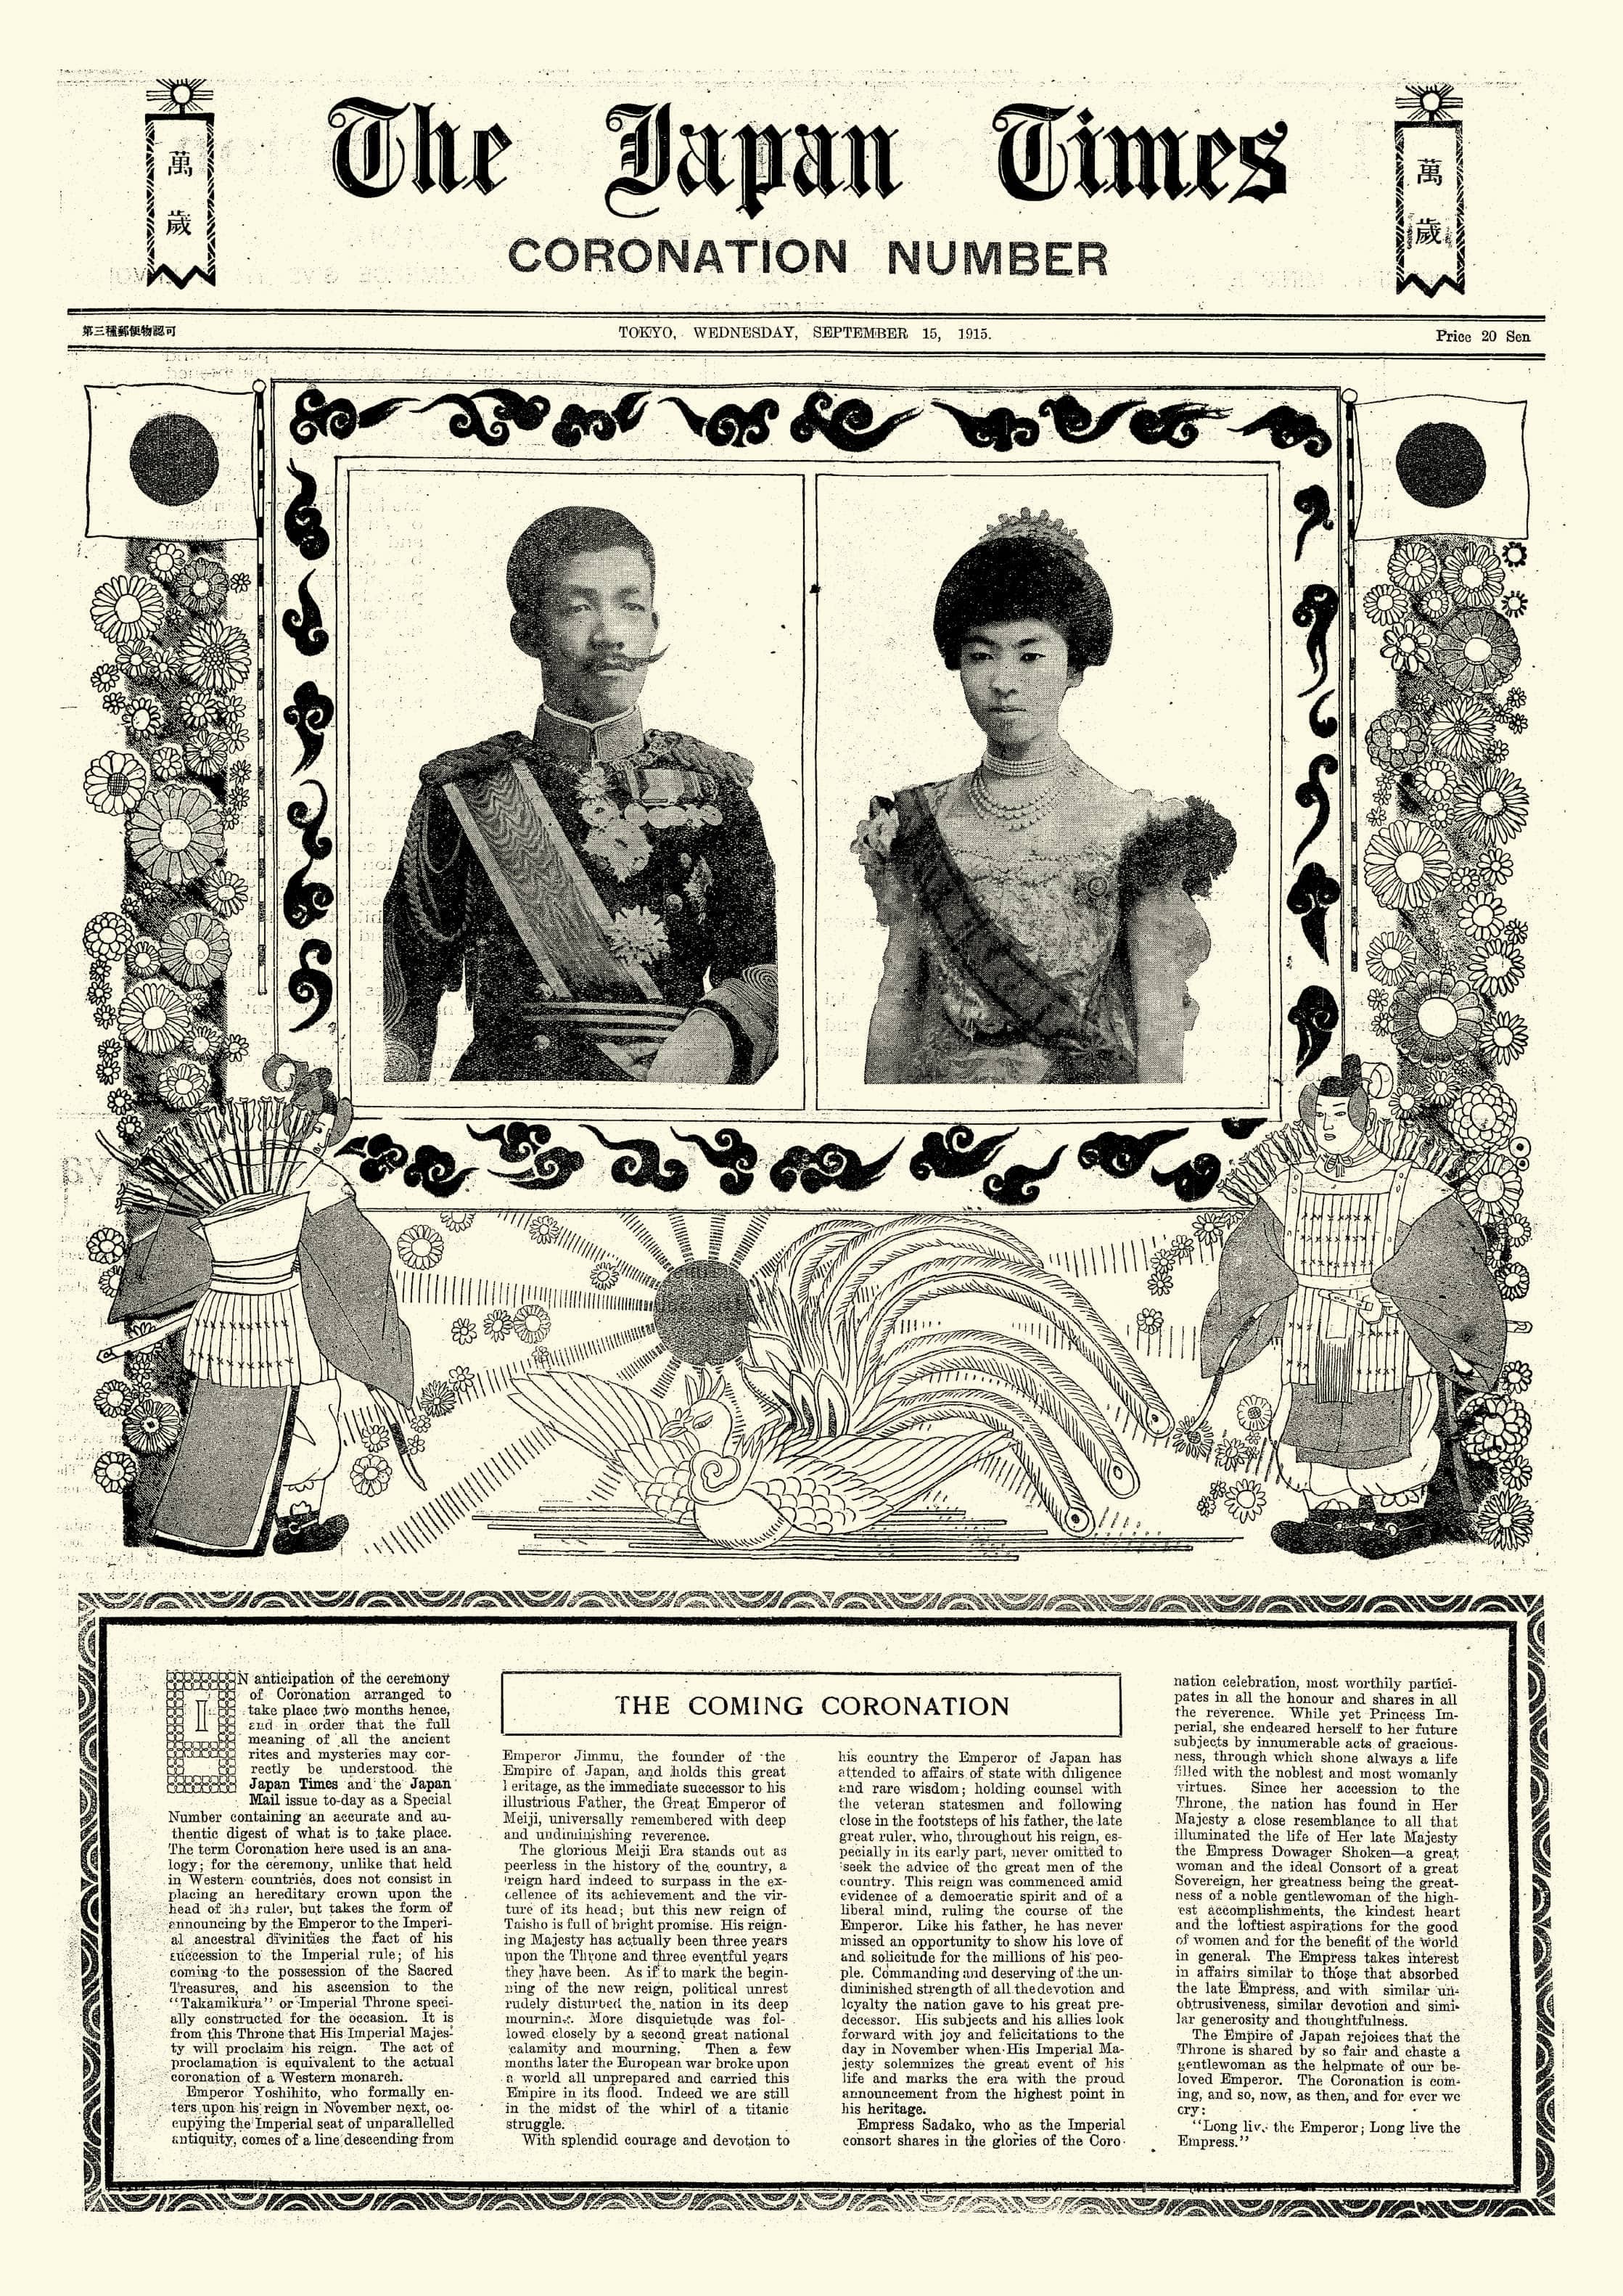 Commemorative issue of the enthronement of the Taisho Emperor